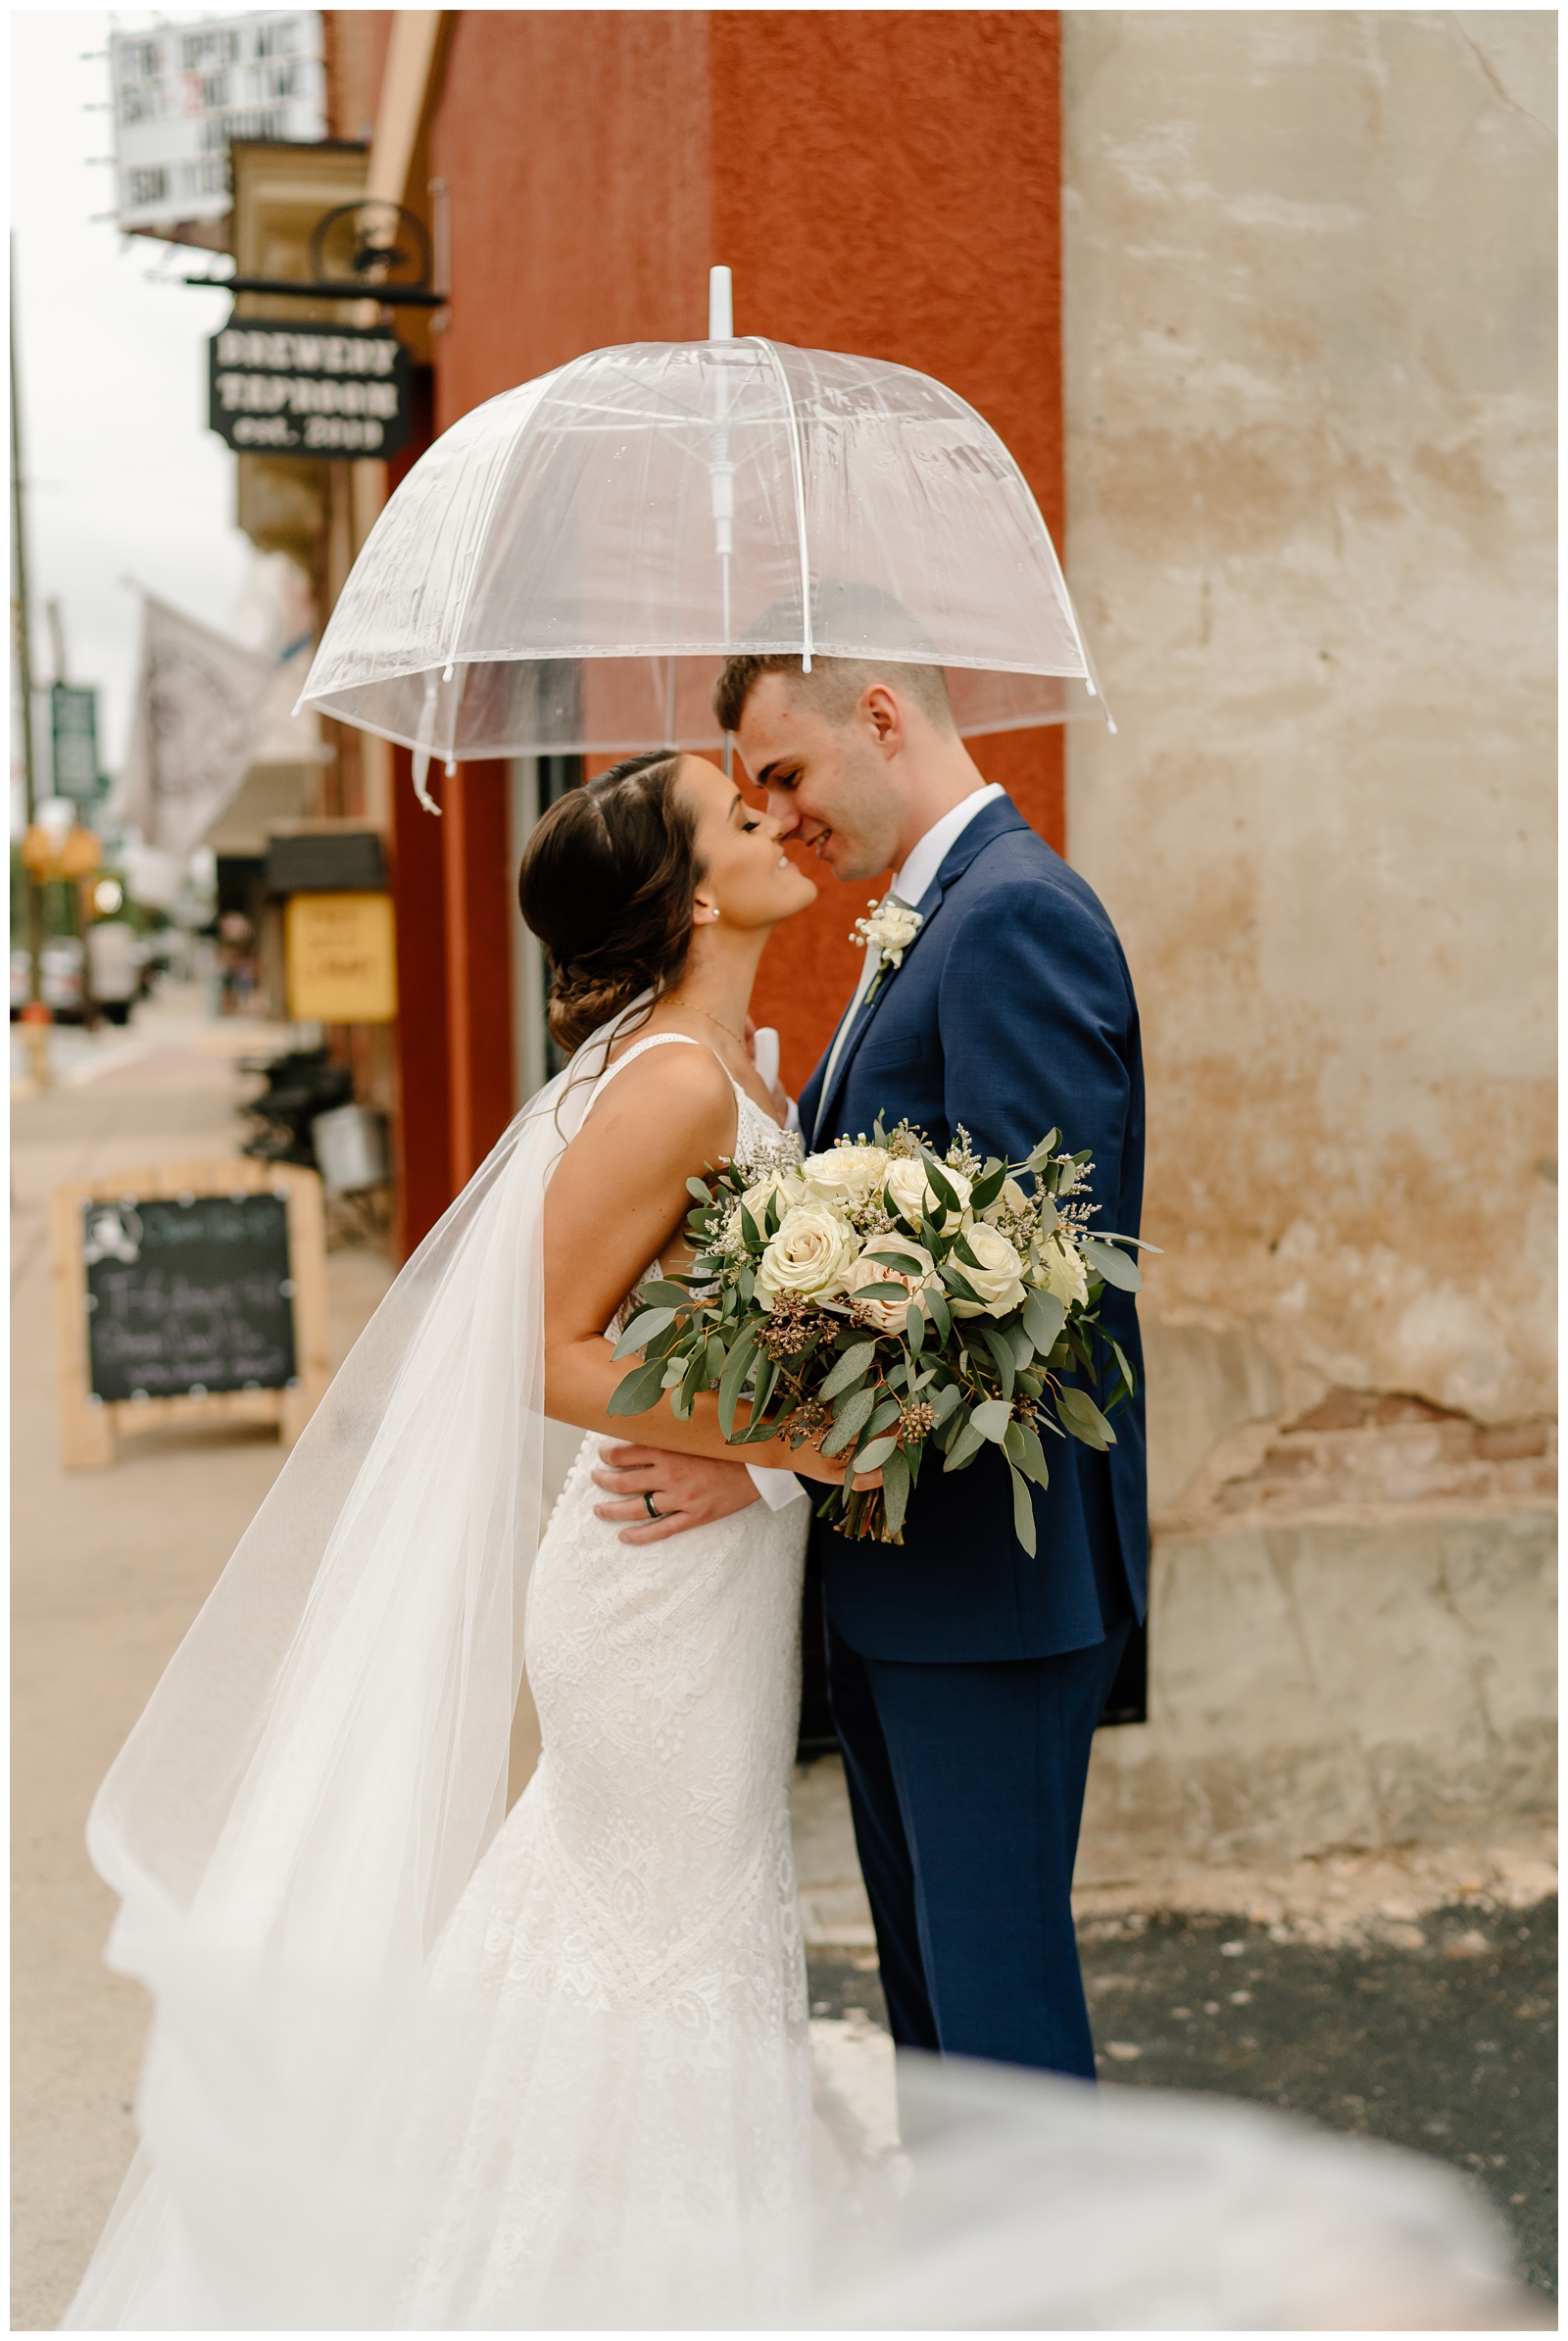 Rainy wedding day portraits with clear umbrella, fluffly bouquet, mermaid lace dress and long veil, modern indie wedding